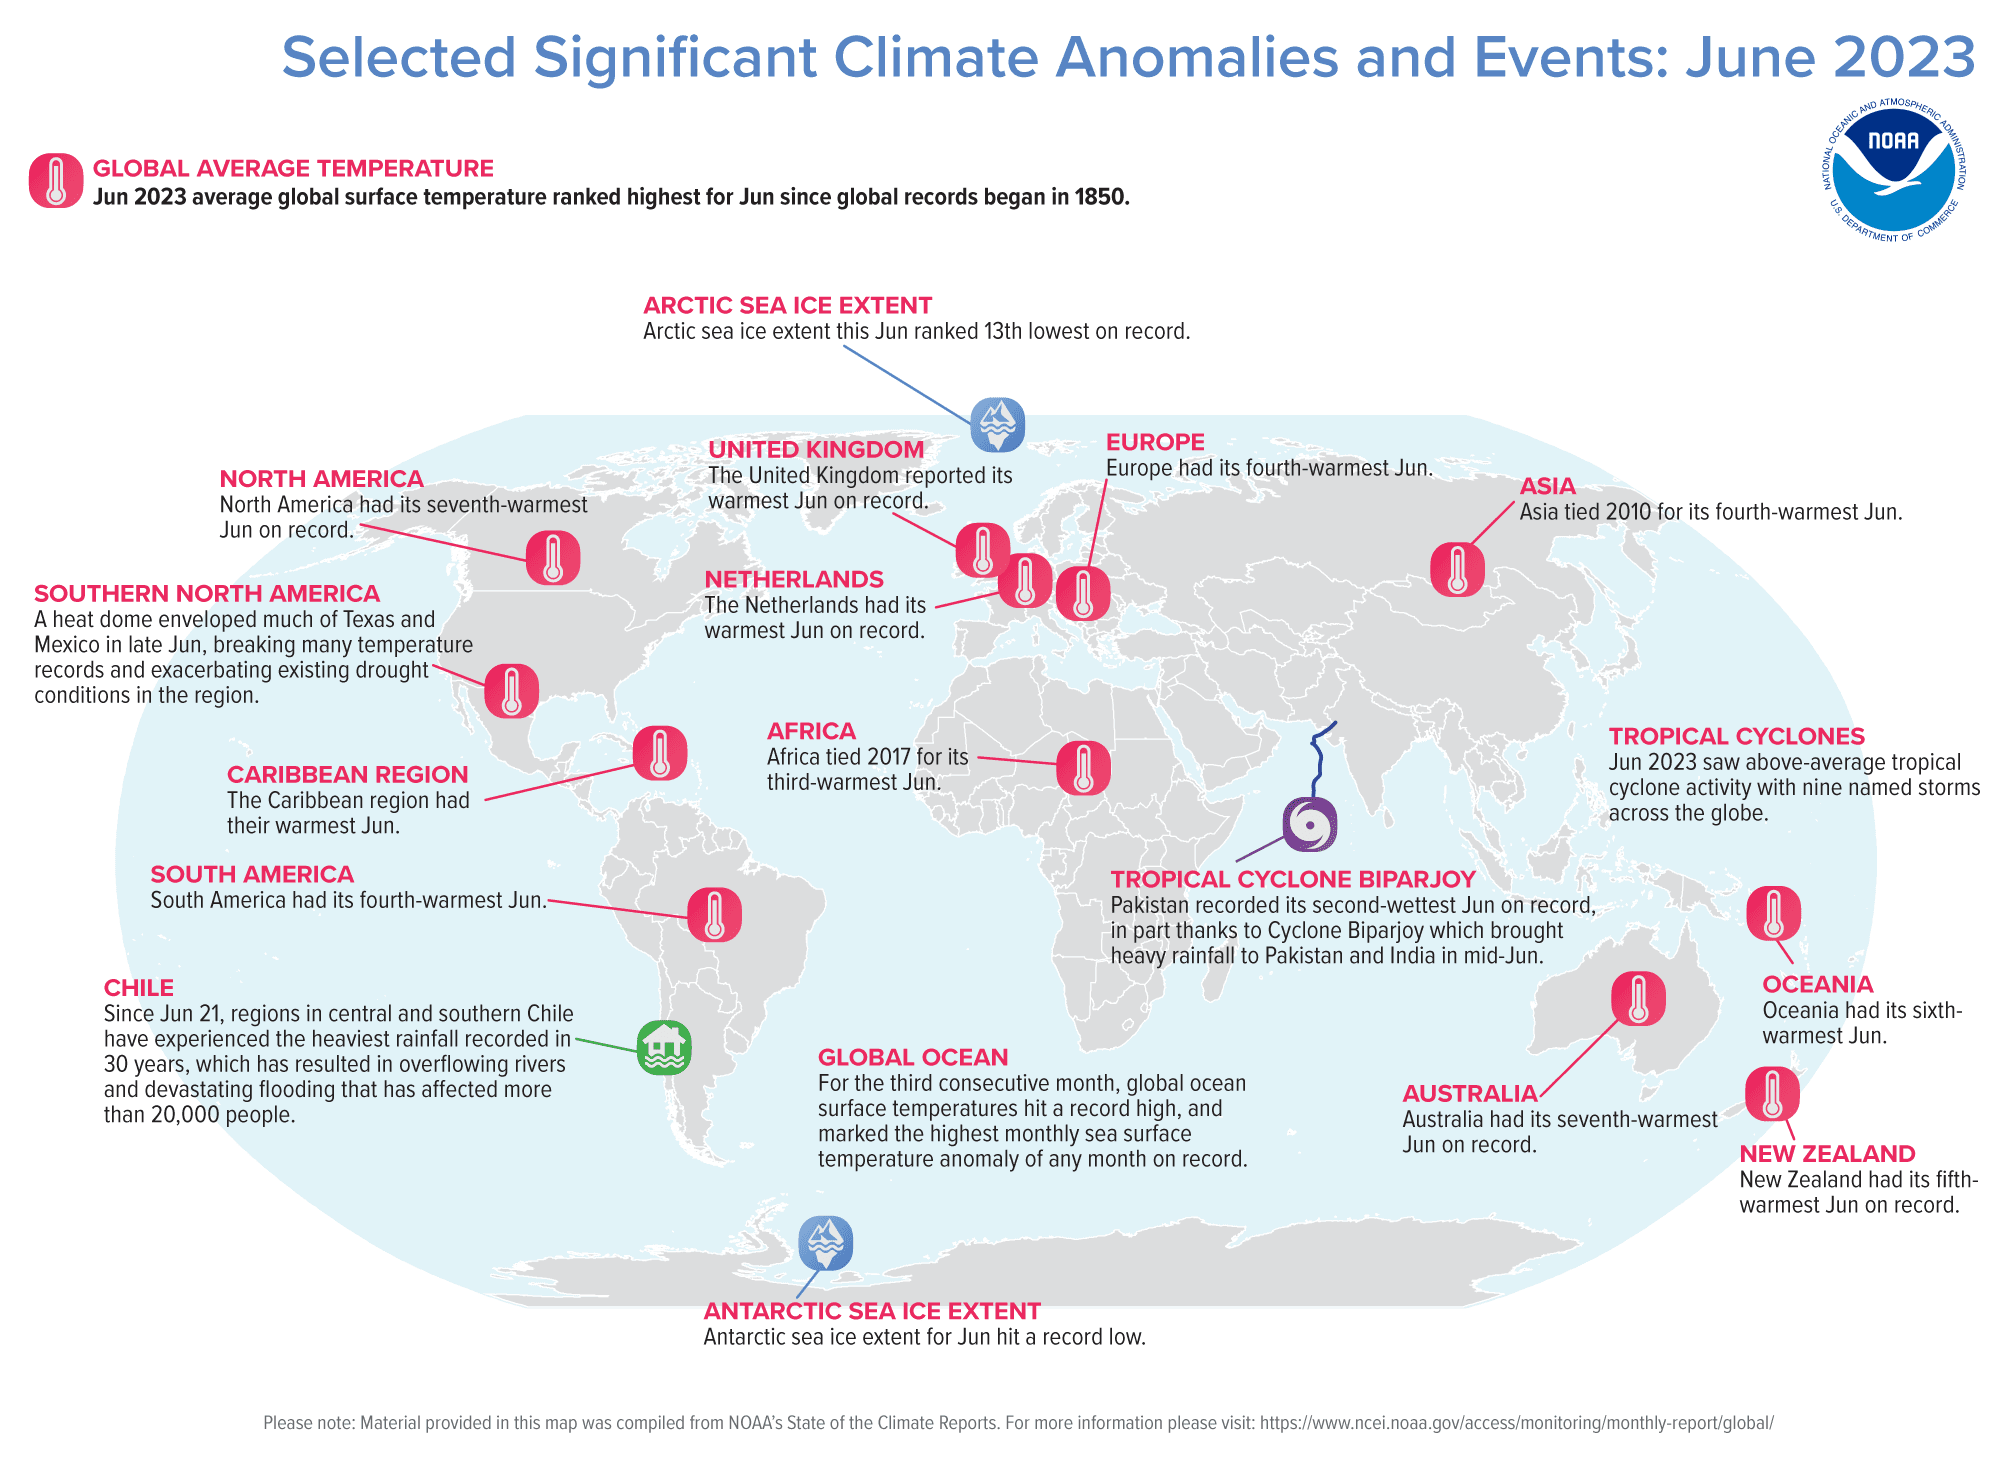 A map of the world plotted with some of the most significant climate events that occurred during June 2023. (Image credit: NOAA/NCEI)